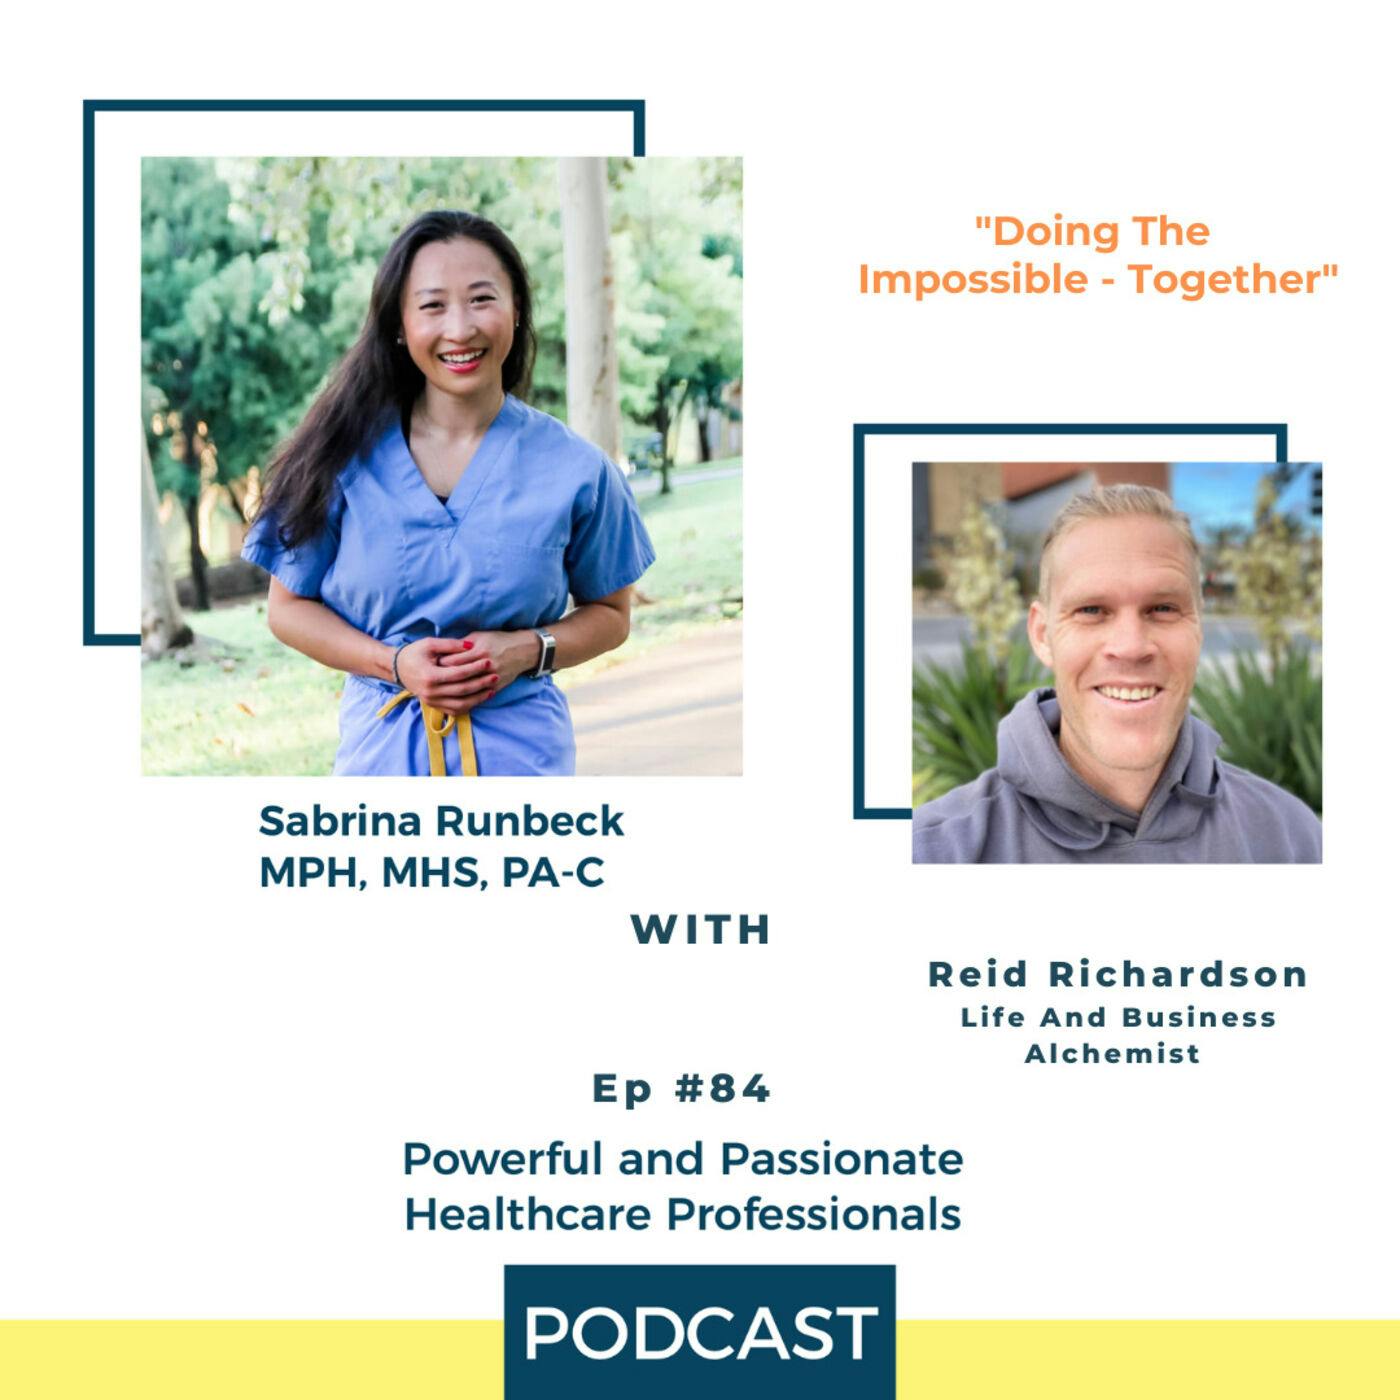 Ep 84 – Doing The Impossible – Together with Reid Richardson